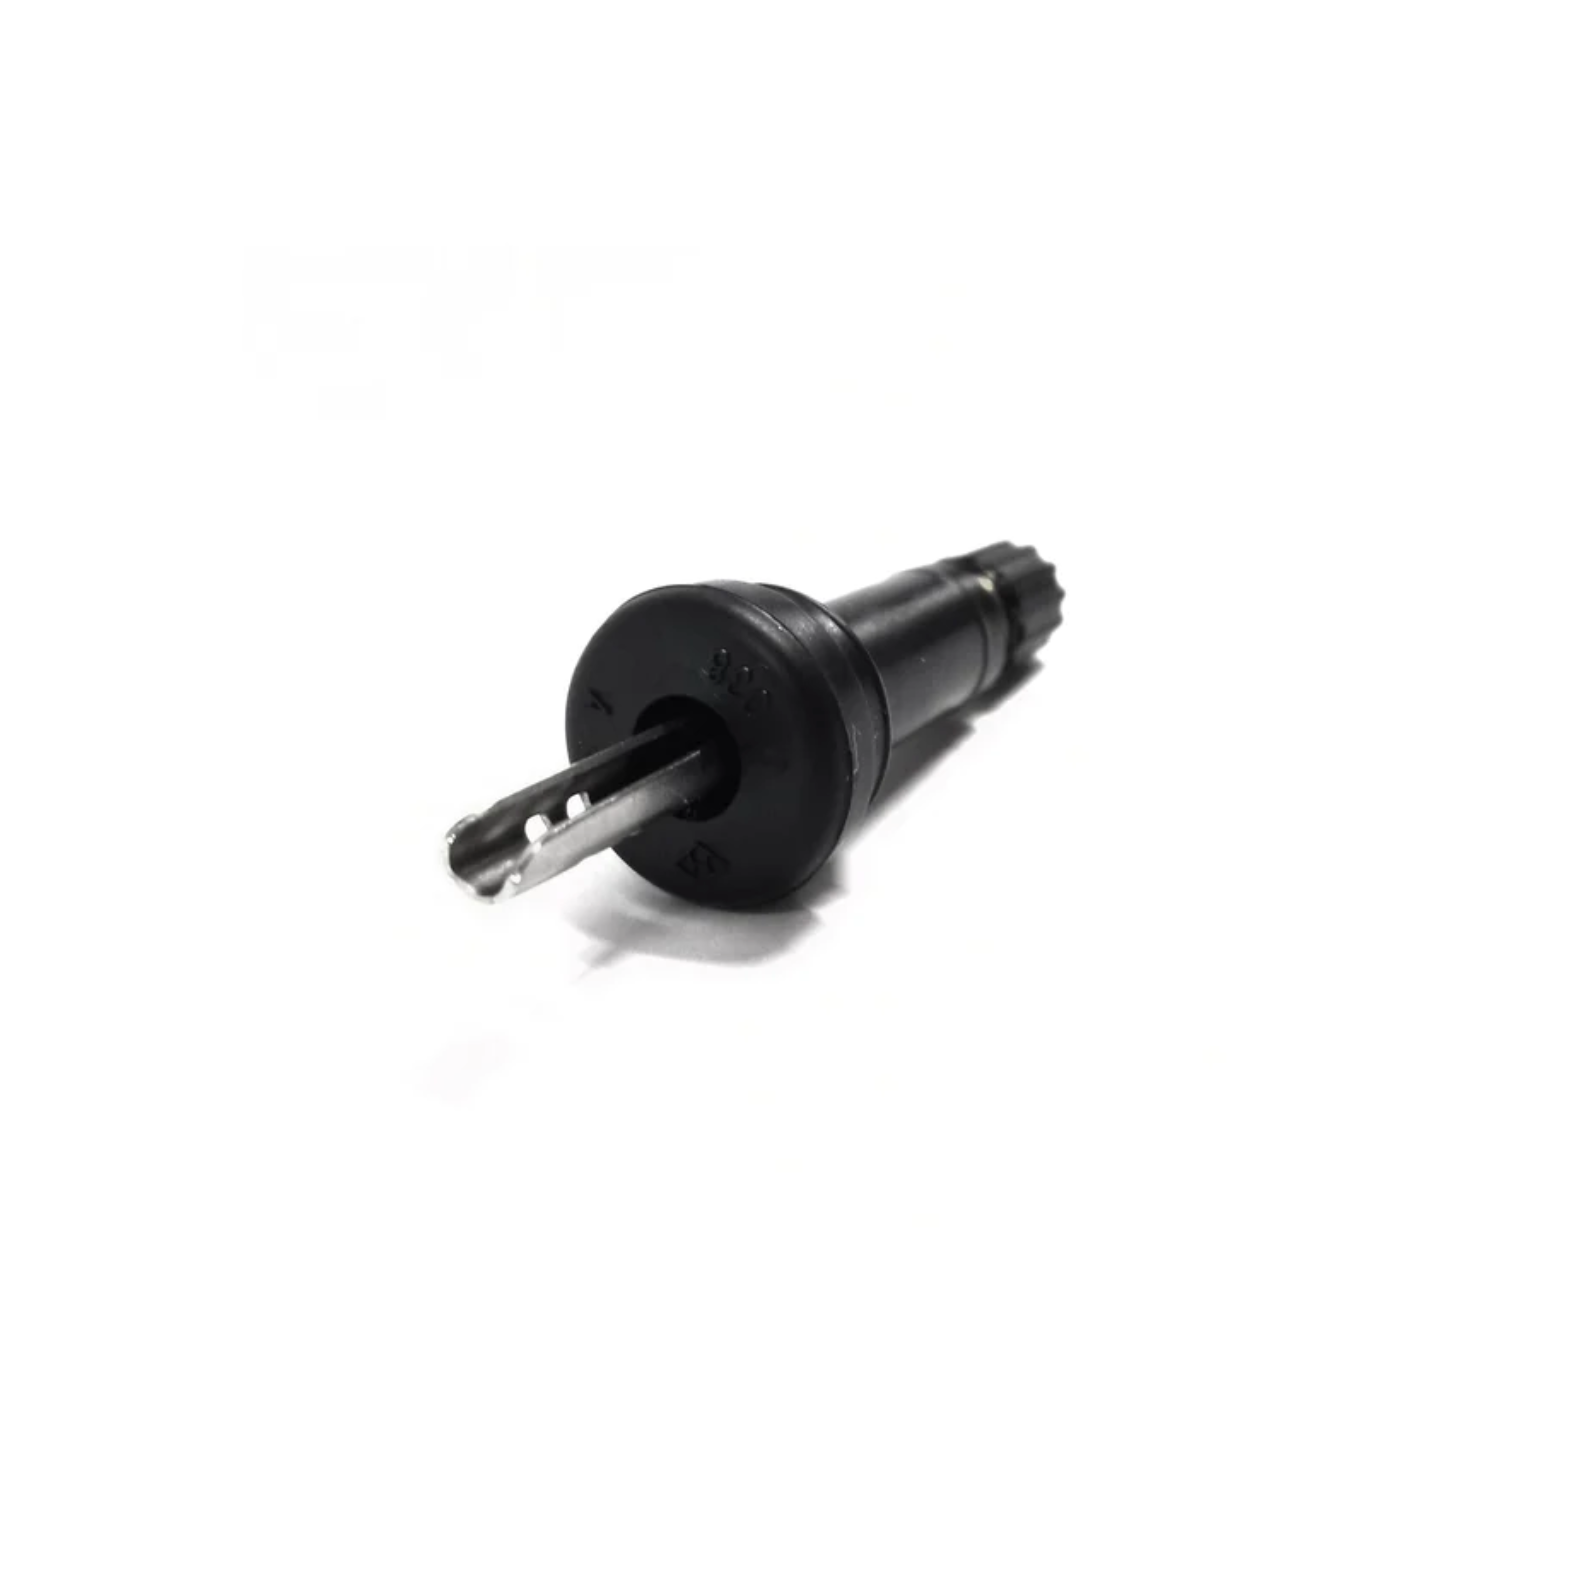 Rubber Snap-in Valve Stems For Nissan TPMS Sensors, Includes Locking Clip | VS-30